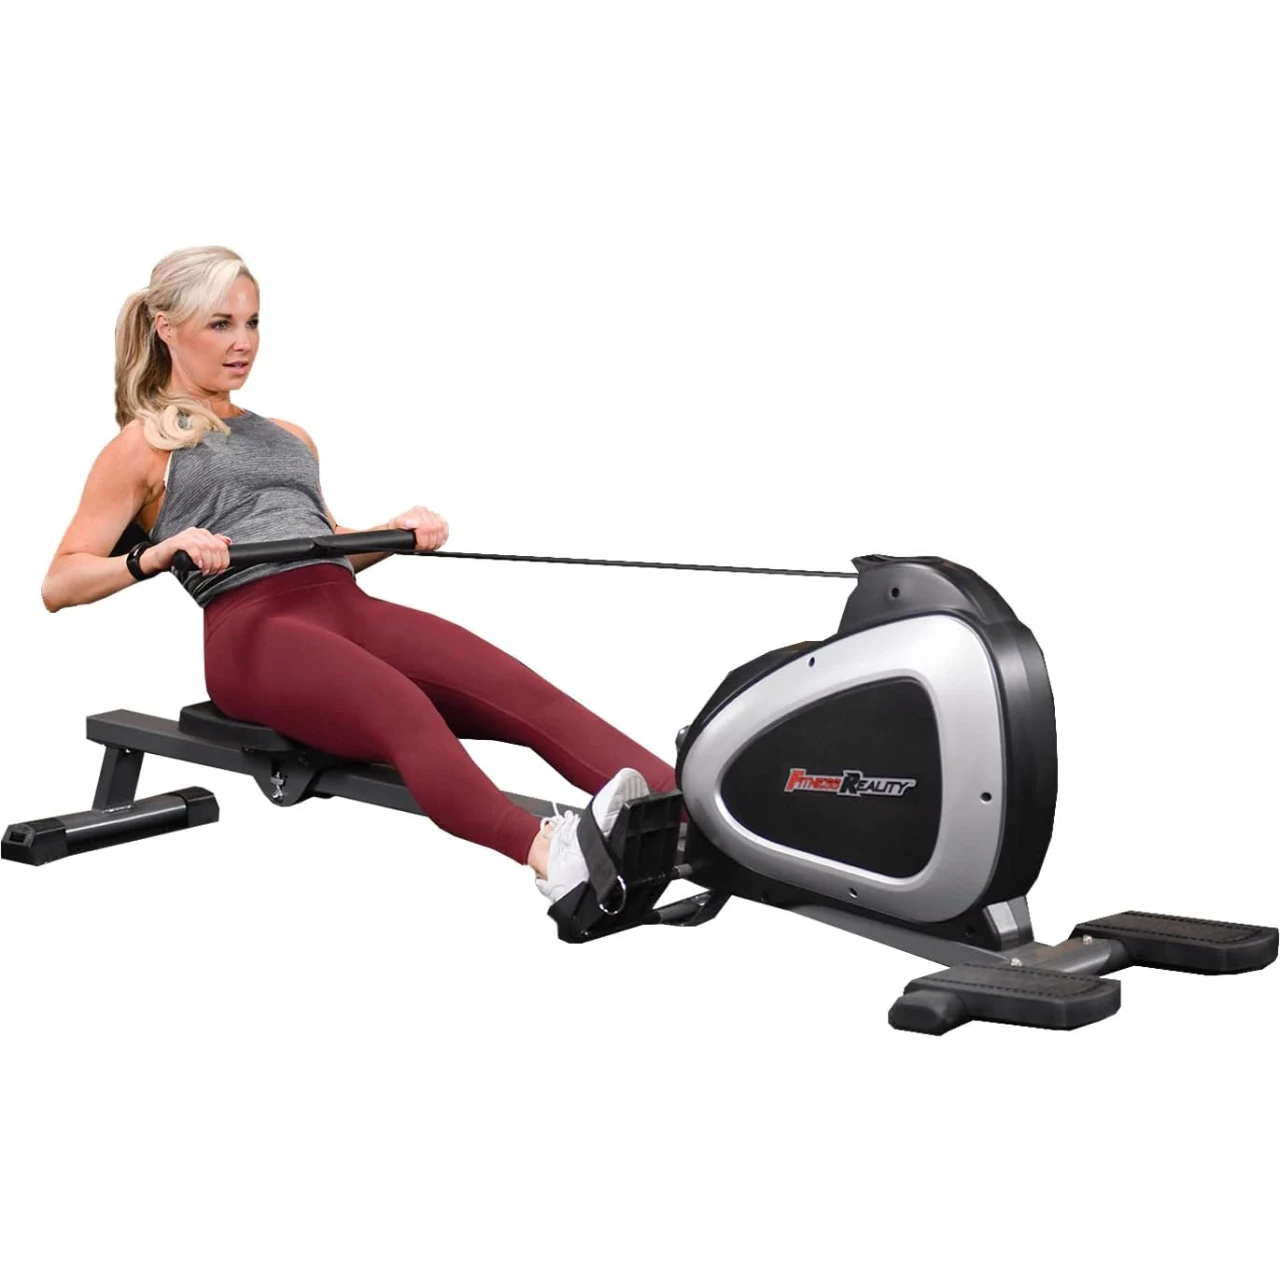 Fitness Reality Magnetic Rowing Machine with Bluetooth Workout Tracking Built-In, Additional Full Body Extended Exercises, App Compatible, Tablet Holder, Rowing Machines for Home Use